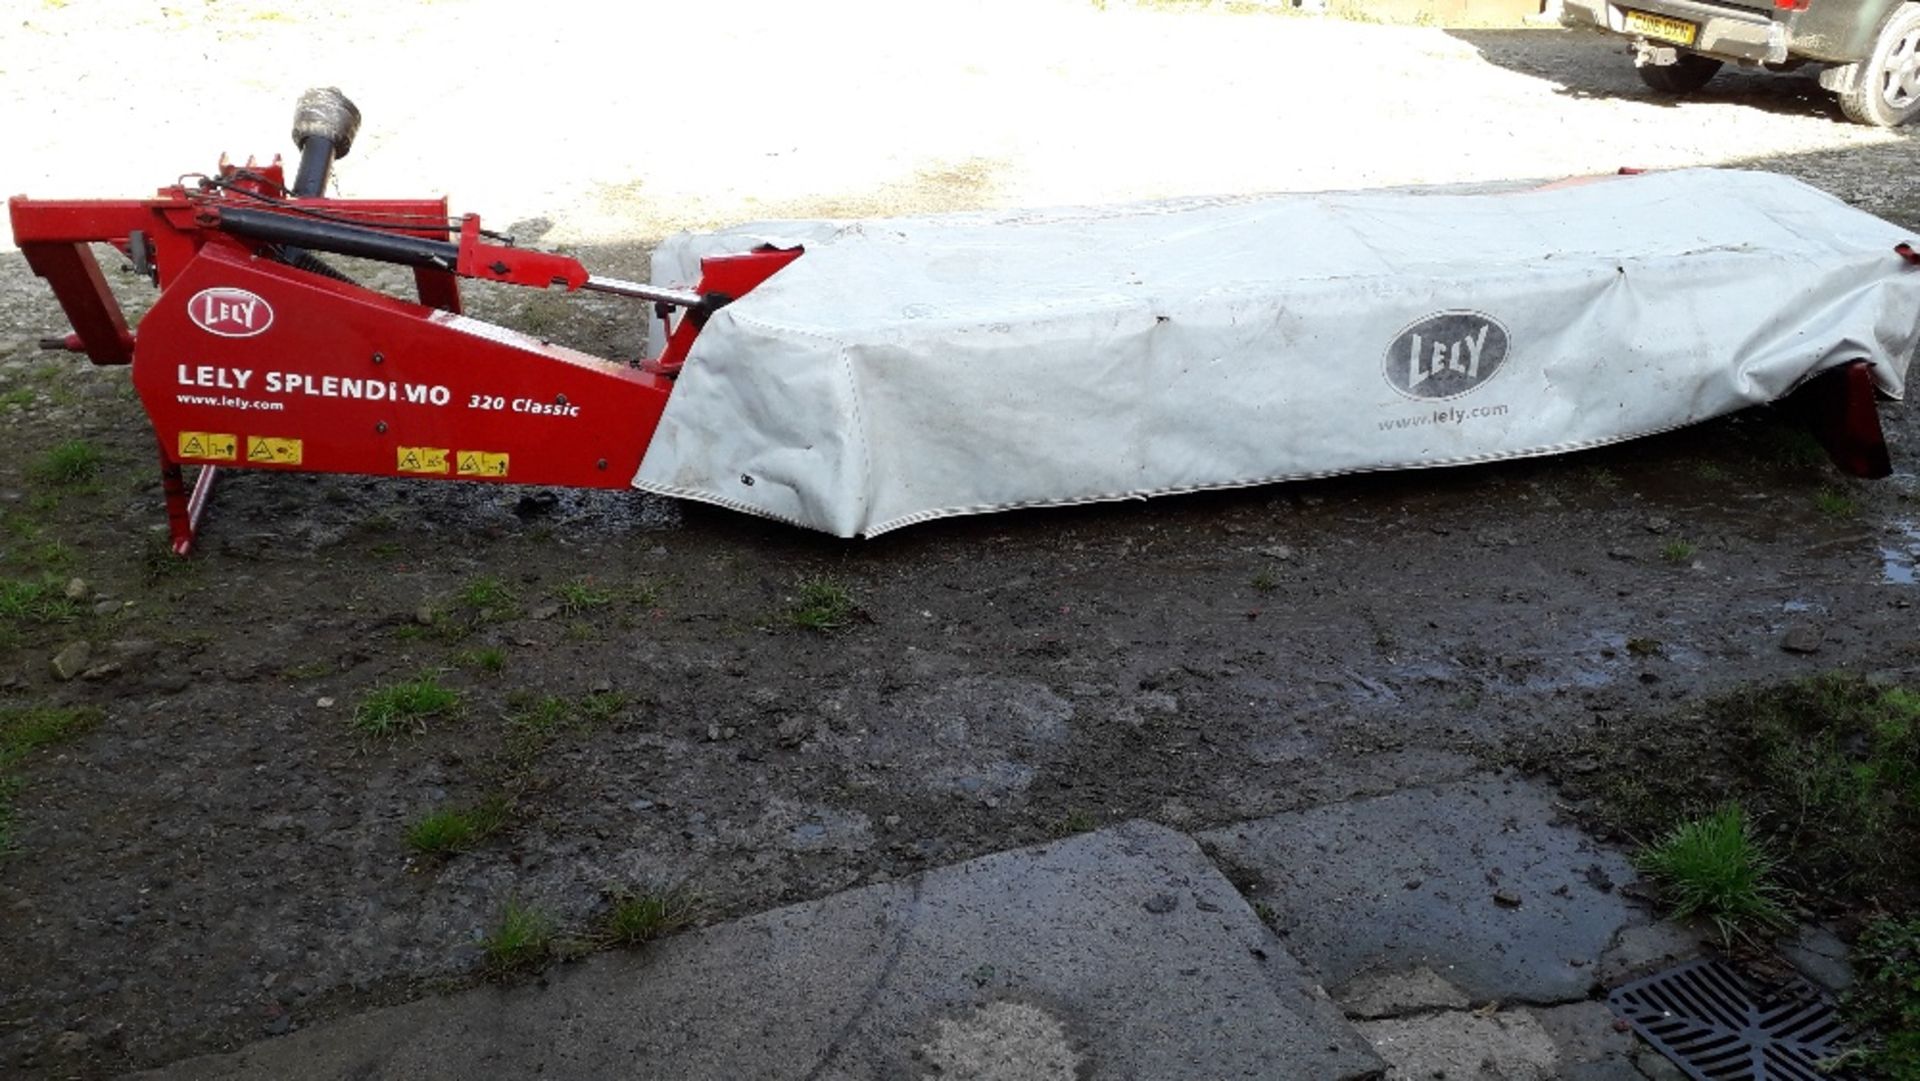 Lely 320 Classic mower. Straight 10' mower in good working order. Serviced and ready for work.